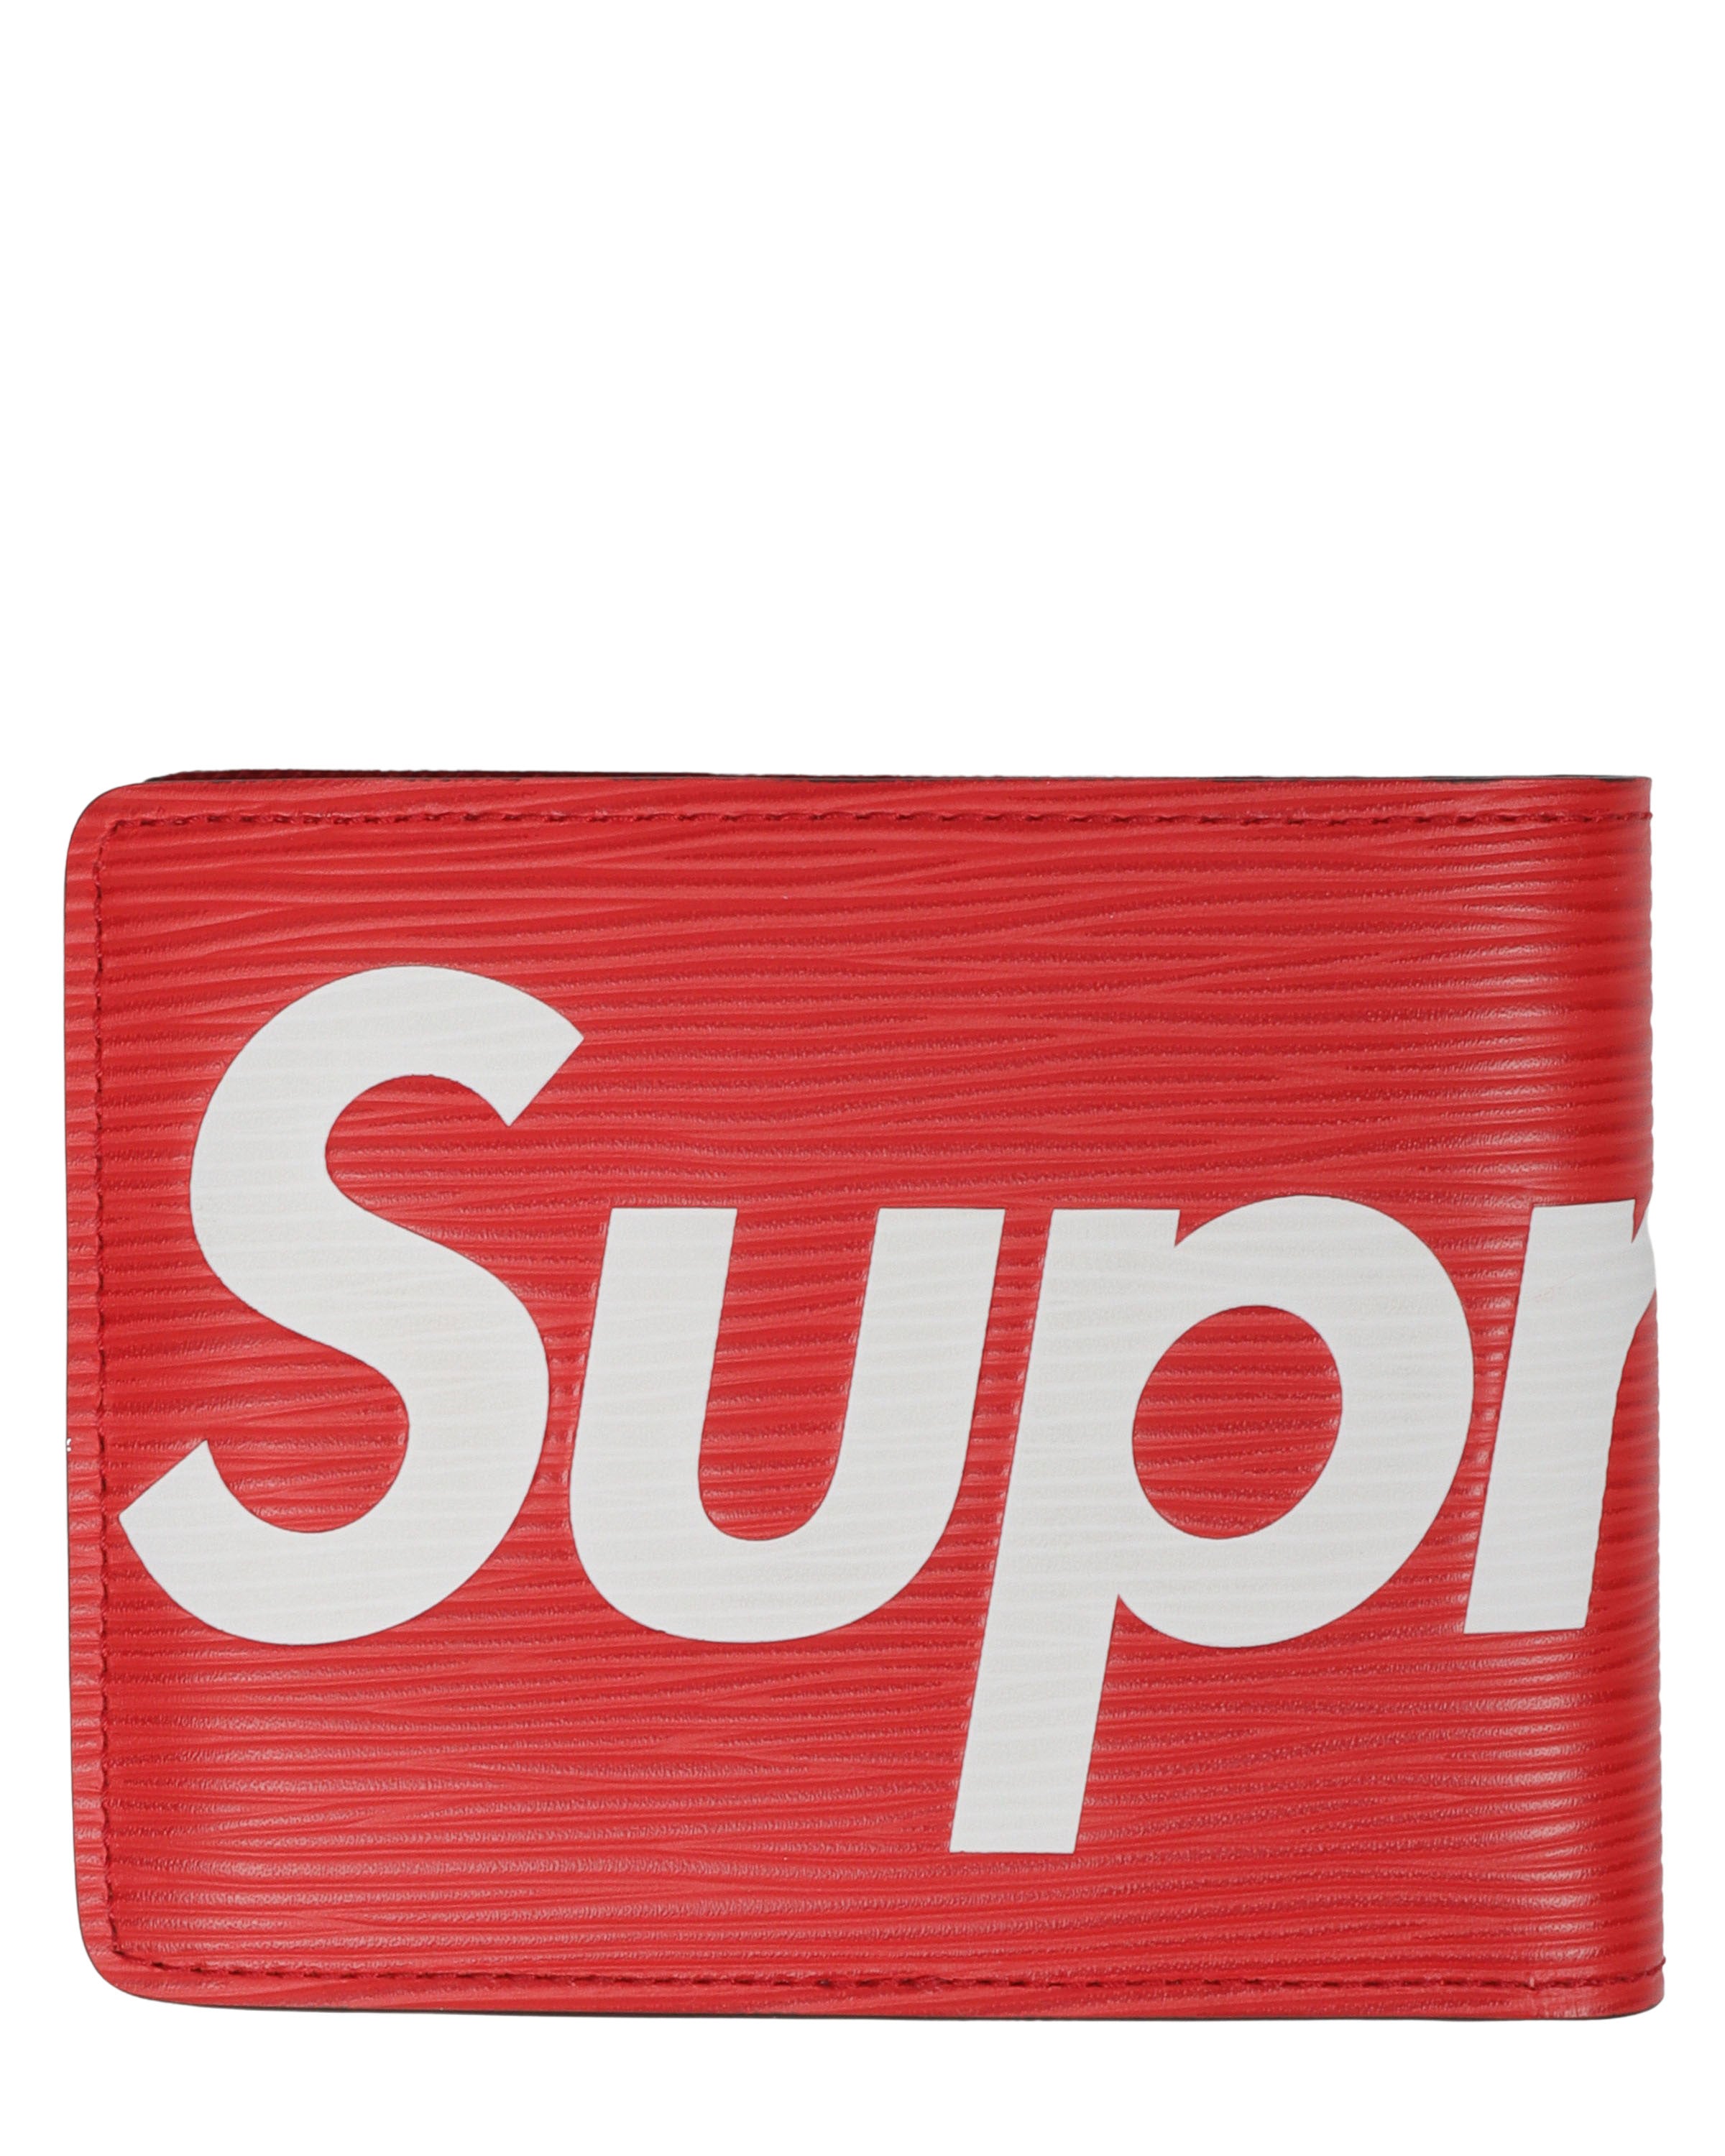 Supreme Bifold Leather Wallet (2020)